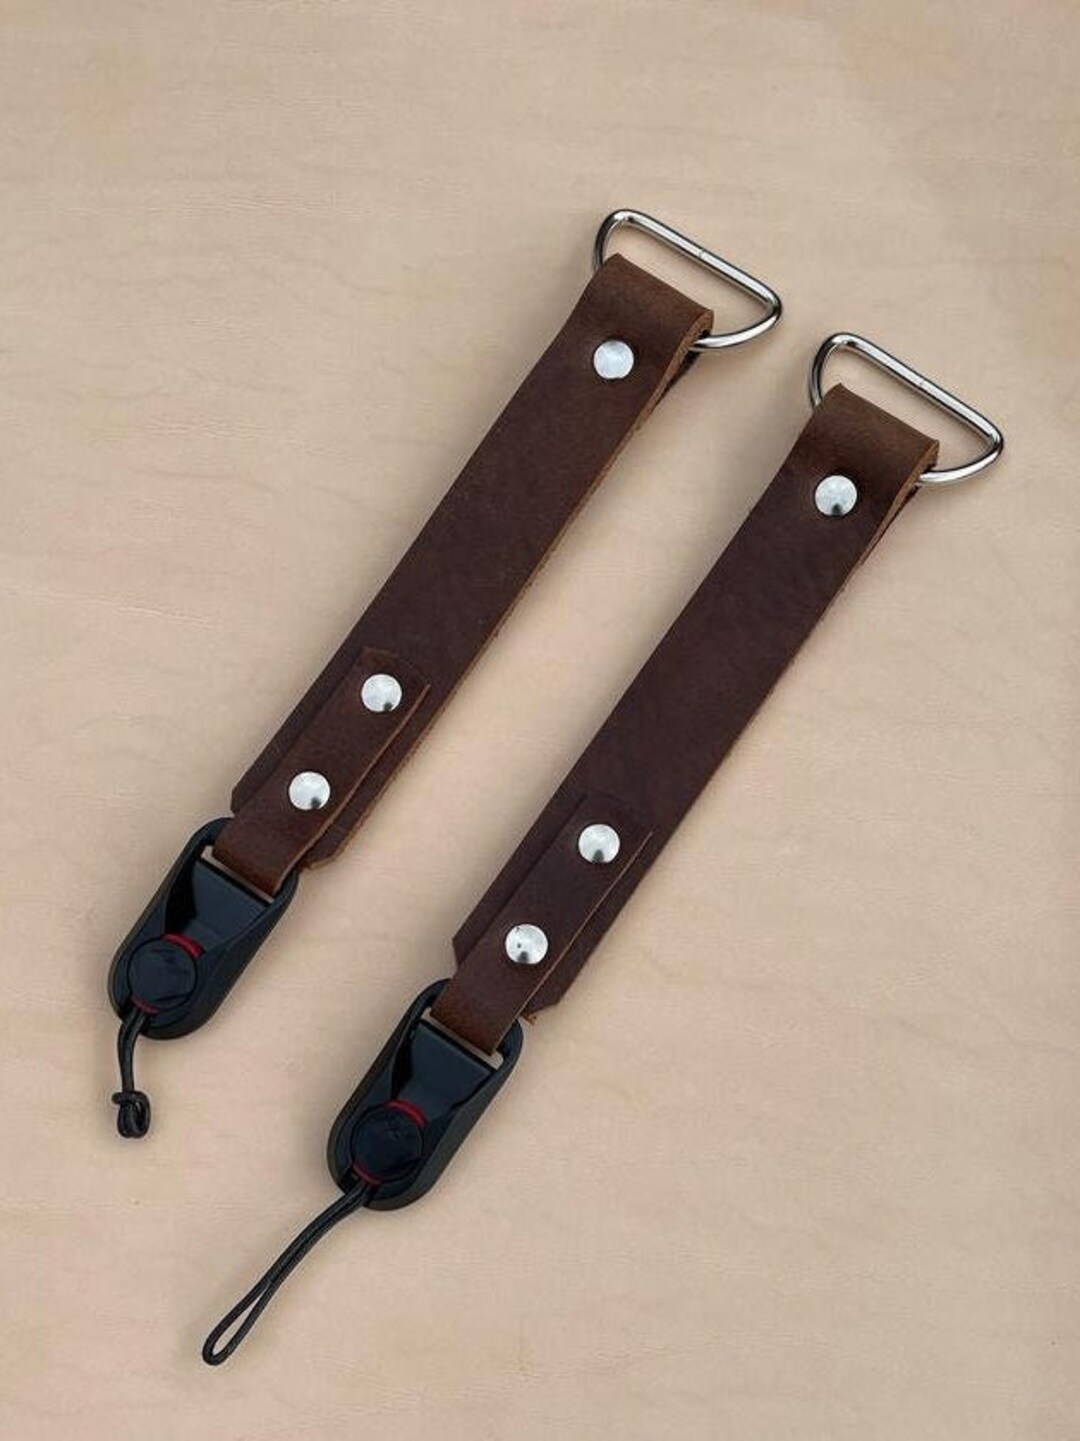 Dual leather camera strap with Peak Design anchor: Accessories